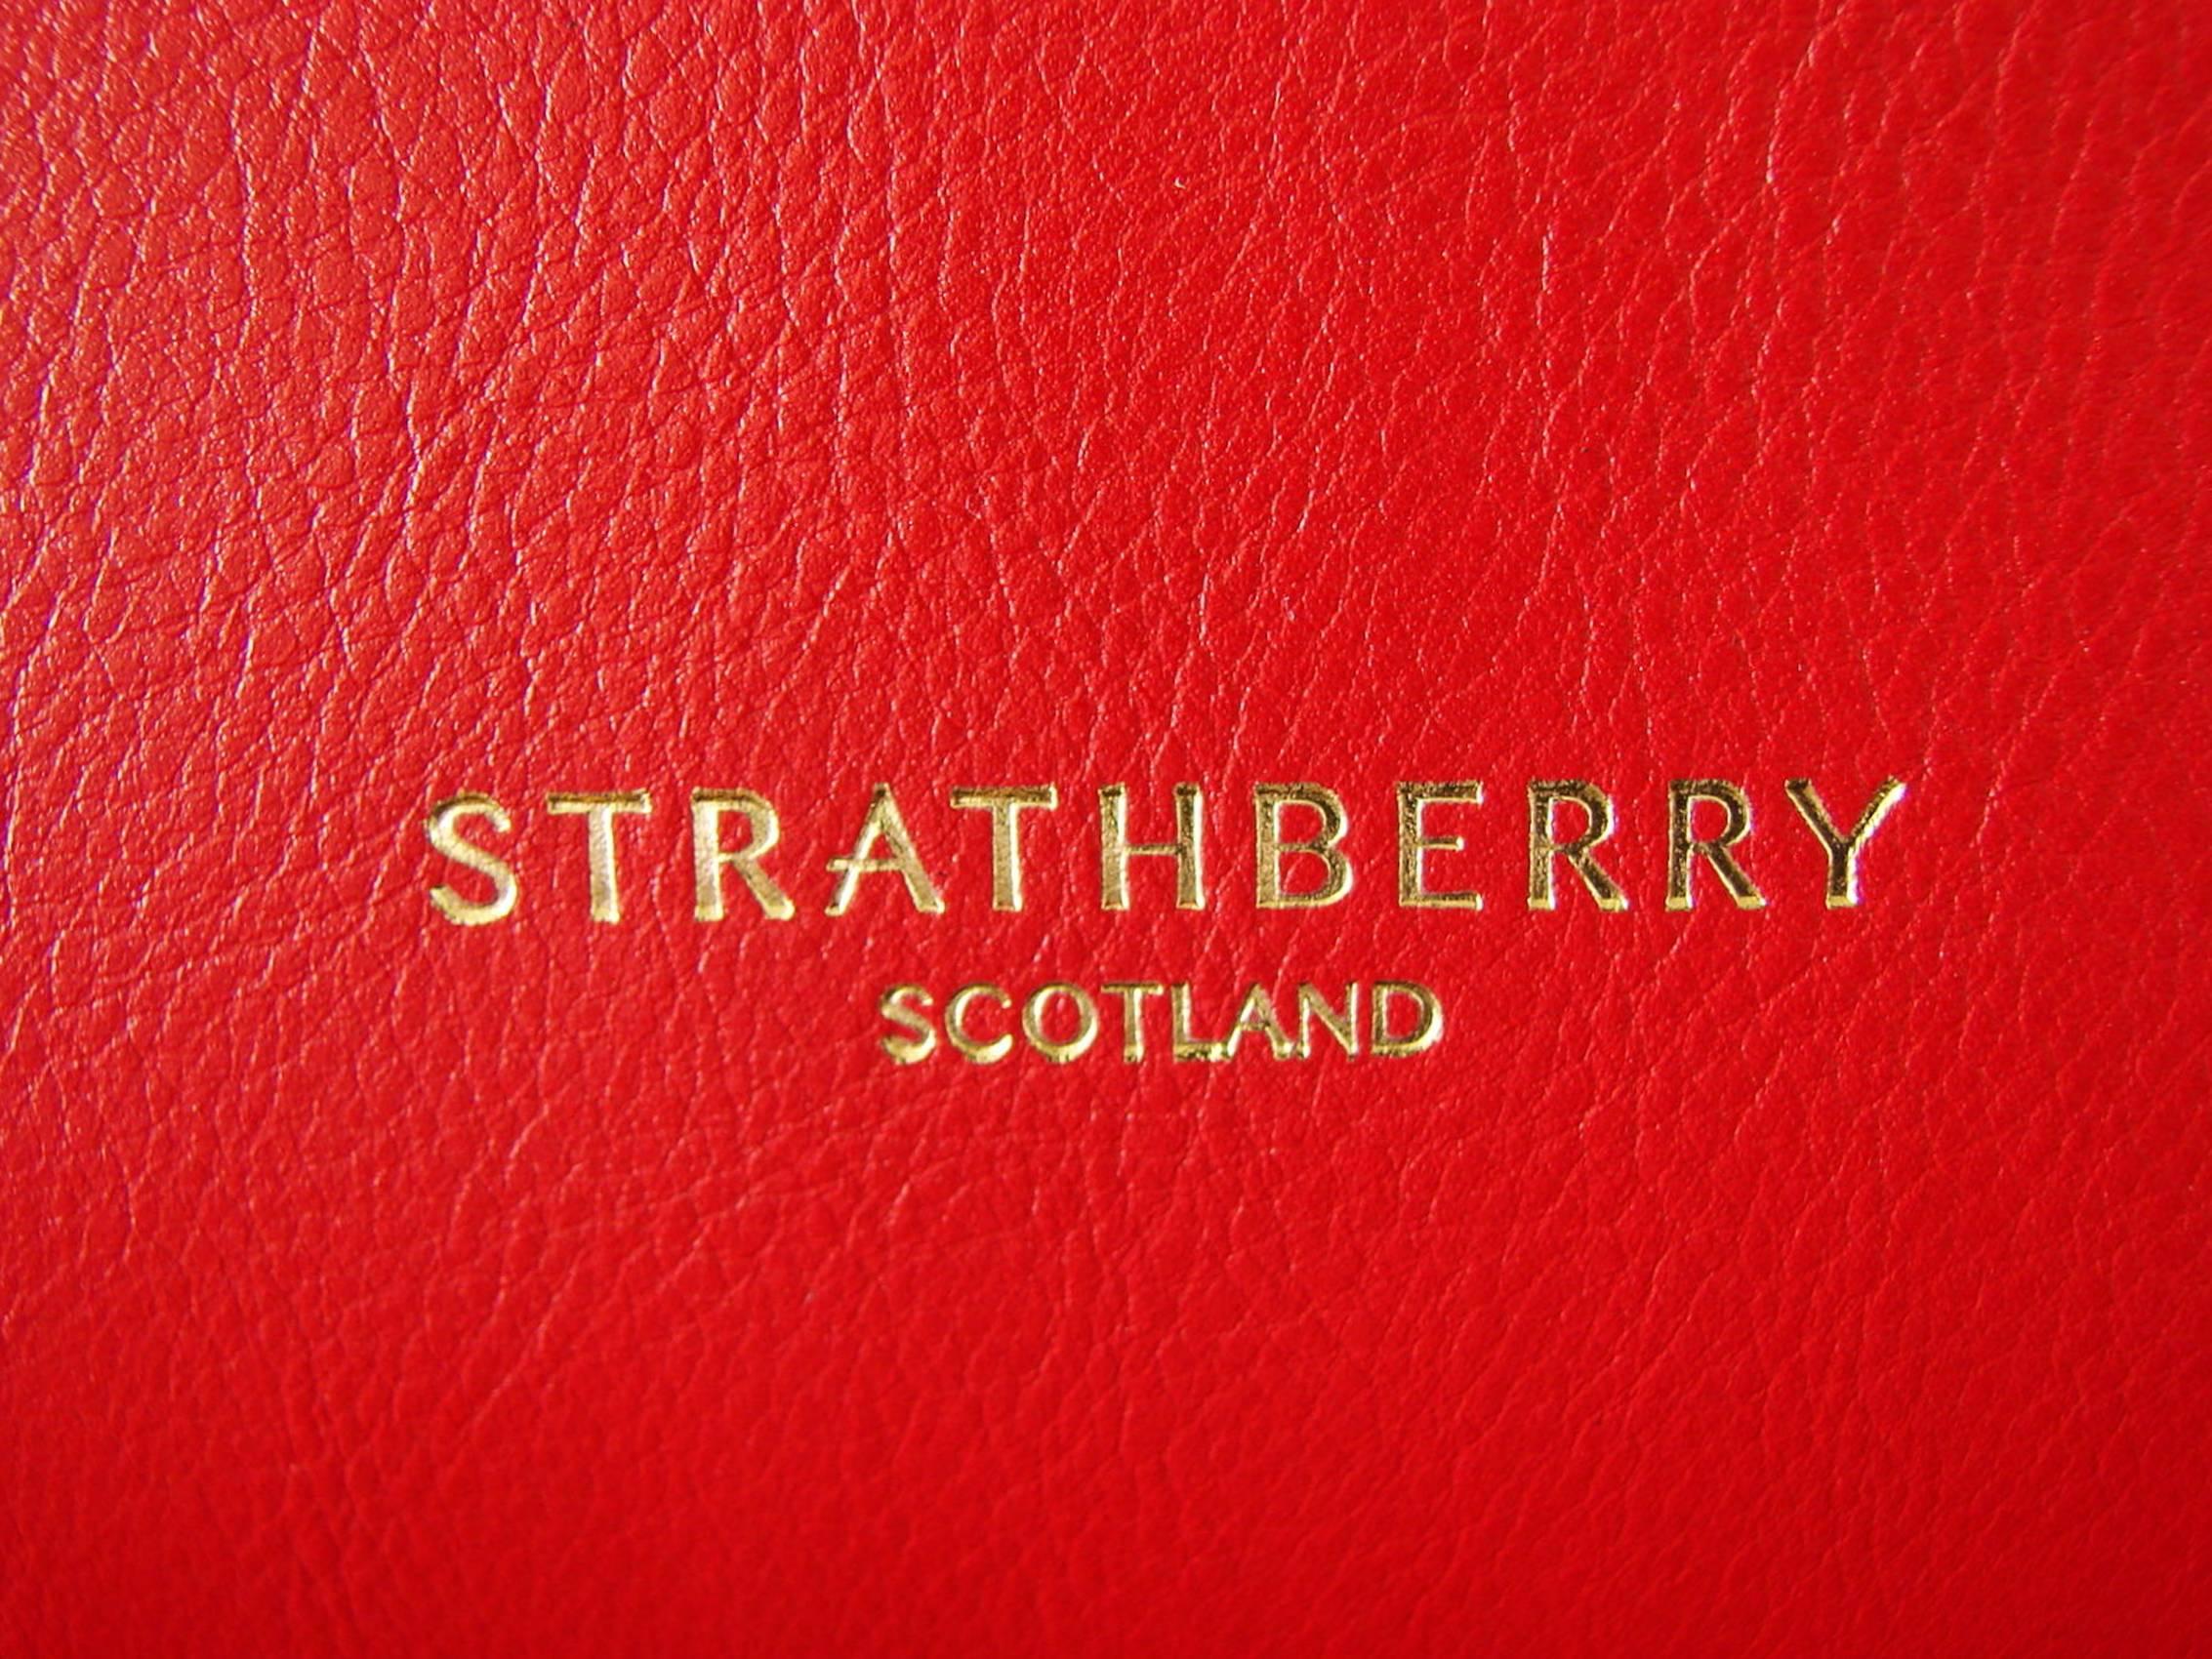 Strathberry Scotland Ruby Leather Tote Bag with Shoulder Strap New + Box 1